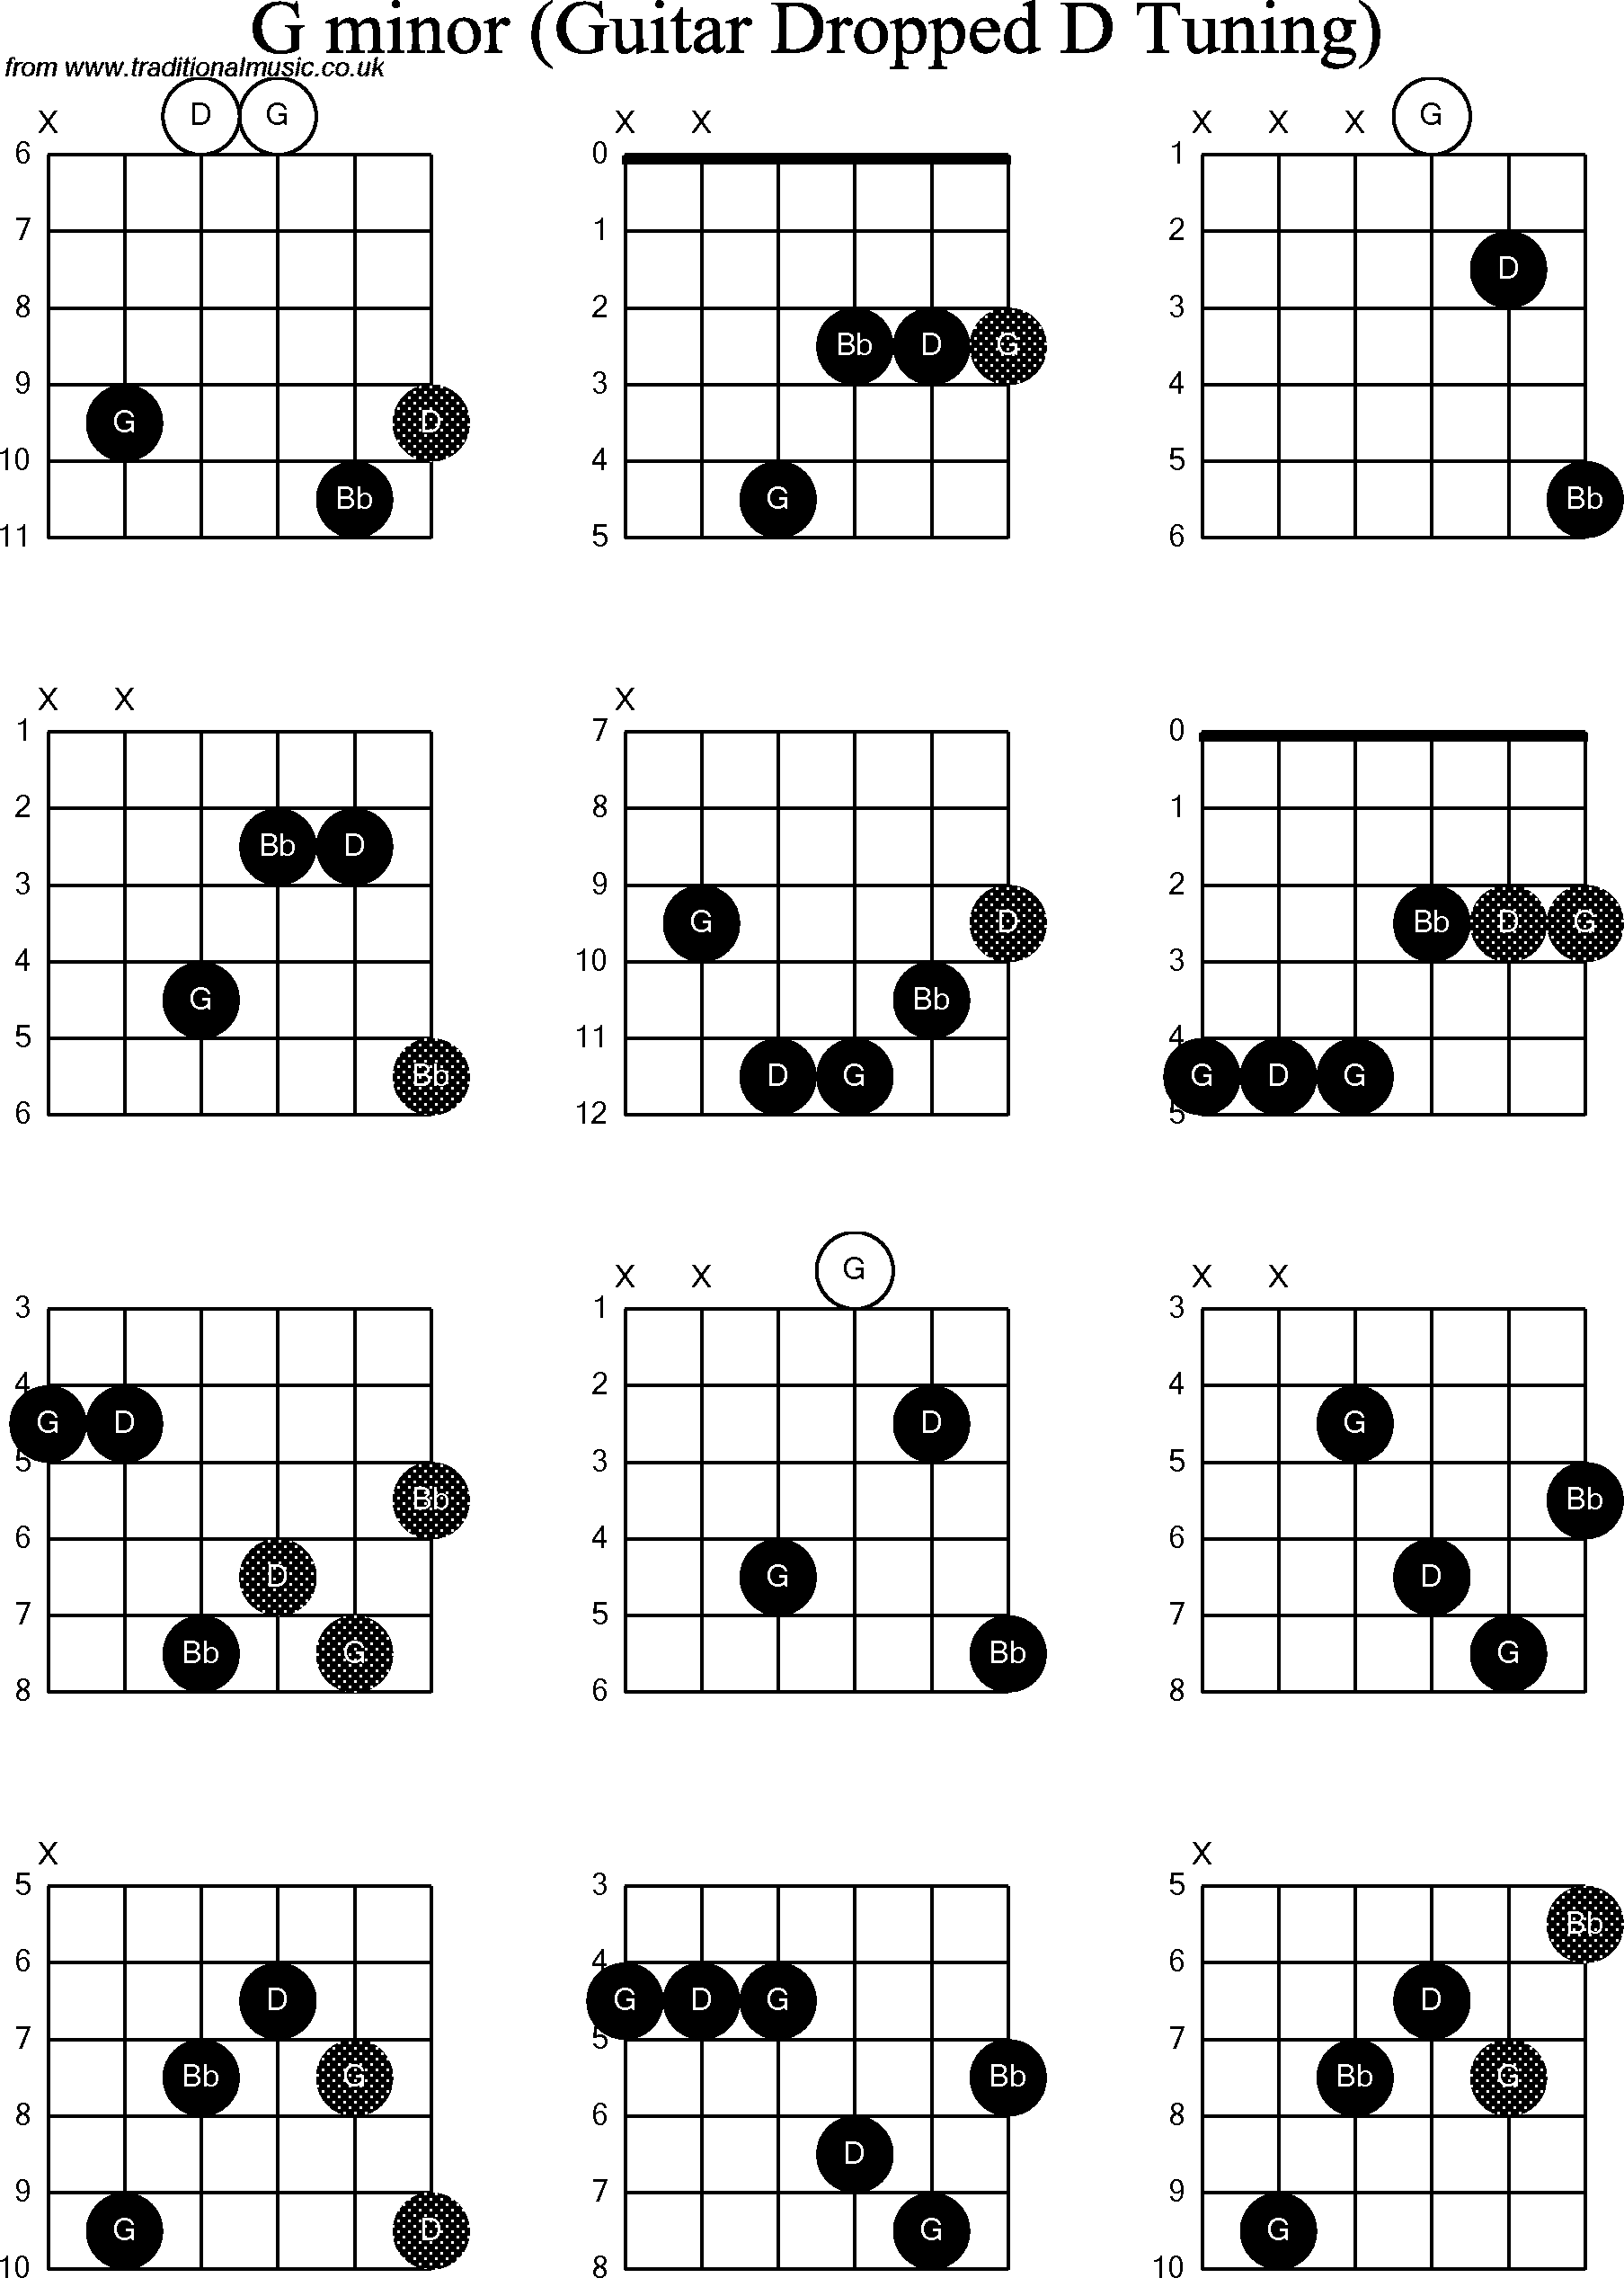 Chord diagrams for dropped D Guitar(DADGBE), G Minor